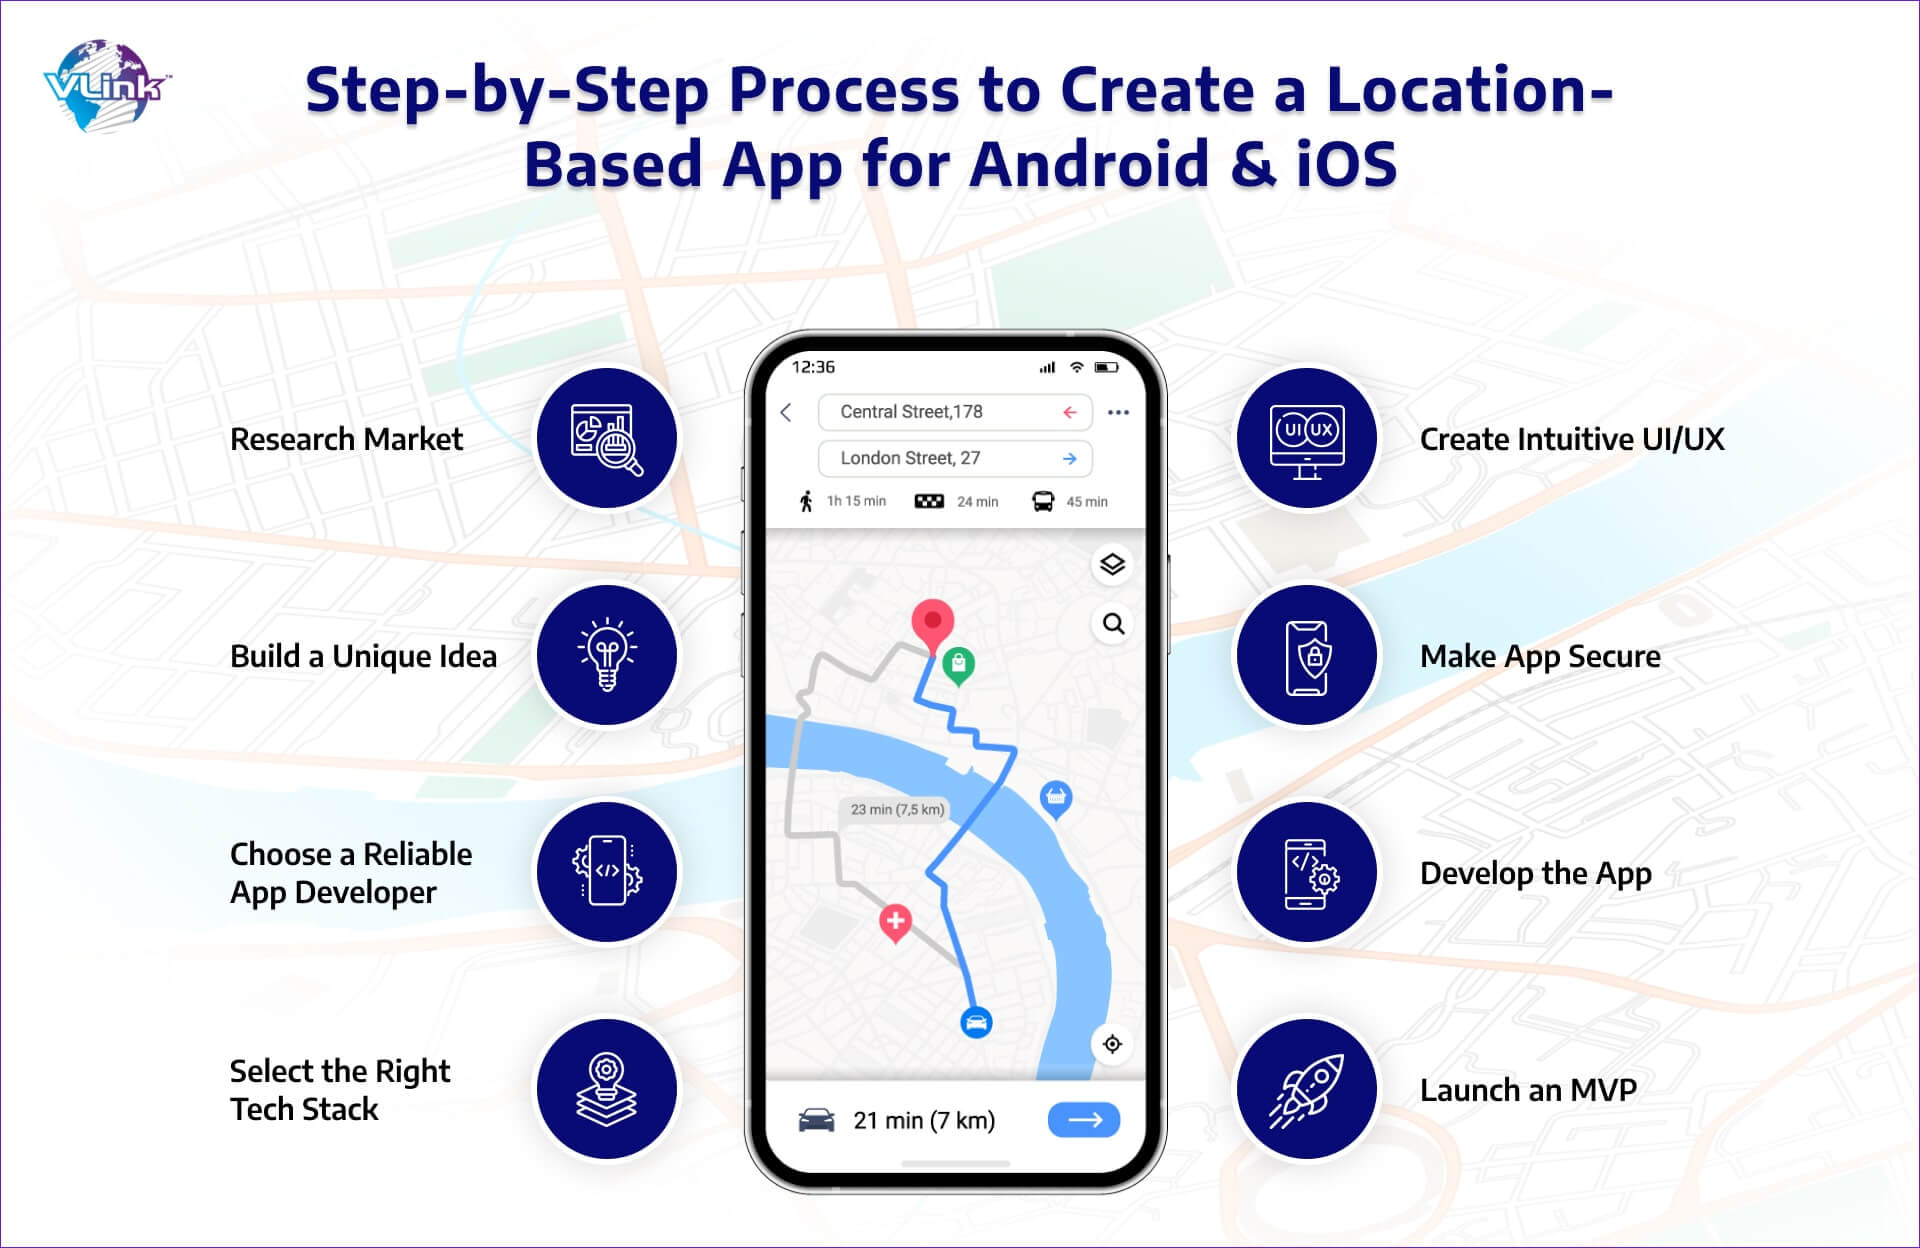 How to Create a Location-Based App for Android & iOS Step-by-Step Process